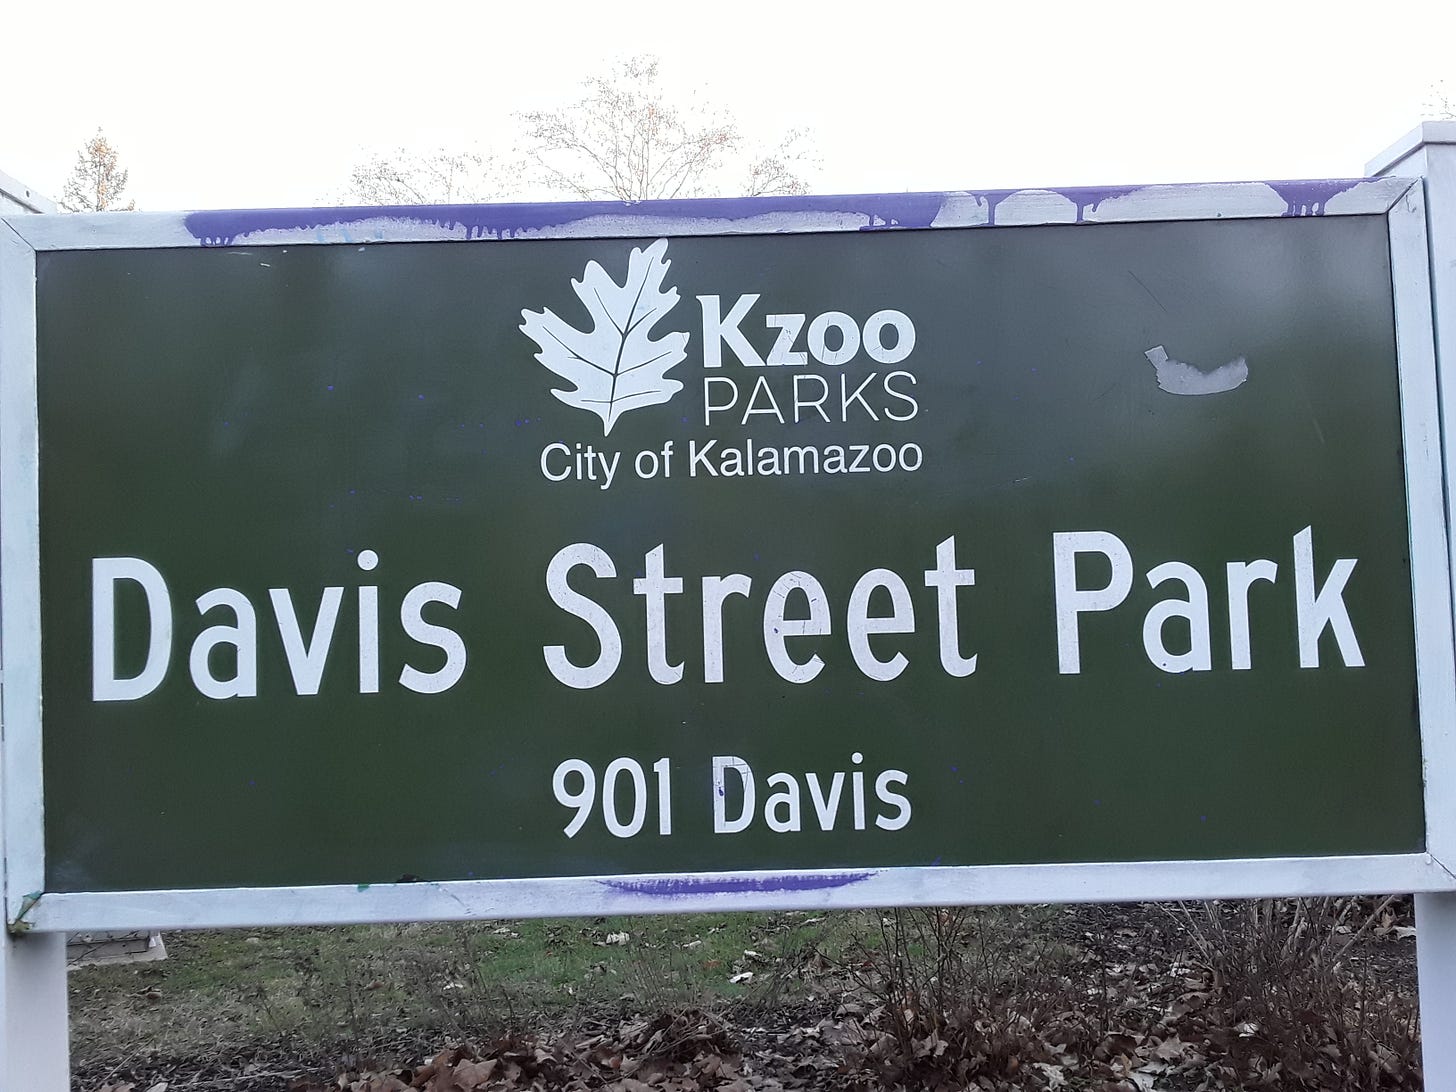 After graffiti removal photograph of Davis Street Park main sign on Monday, January 9, previously posted on my campaign Facebook page.